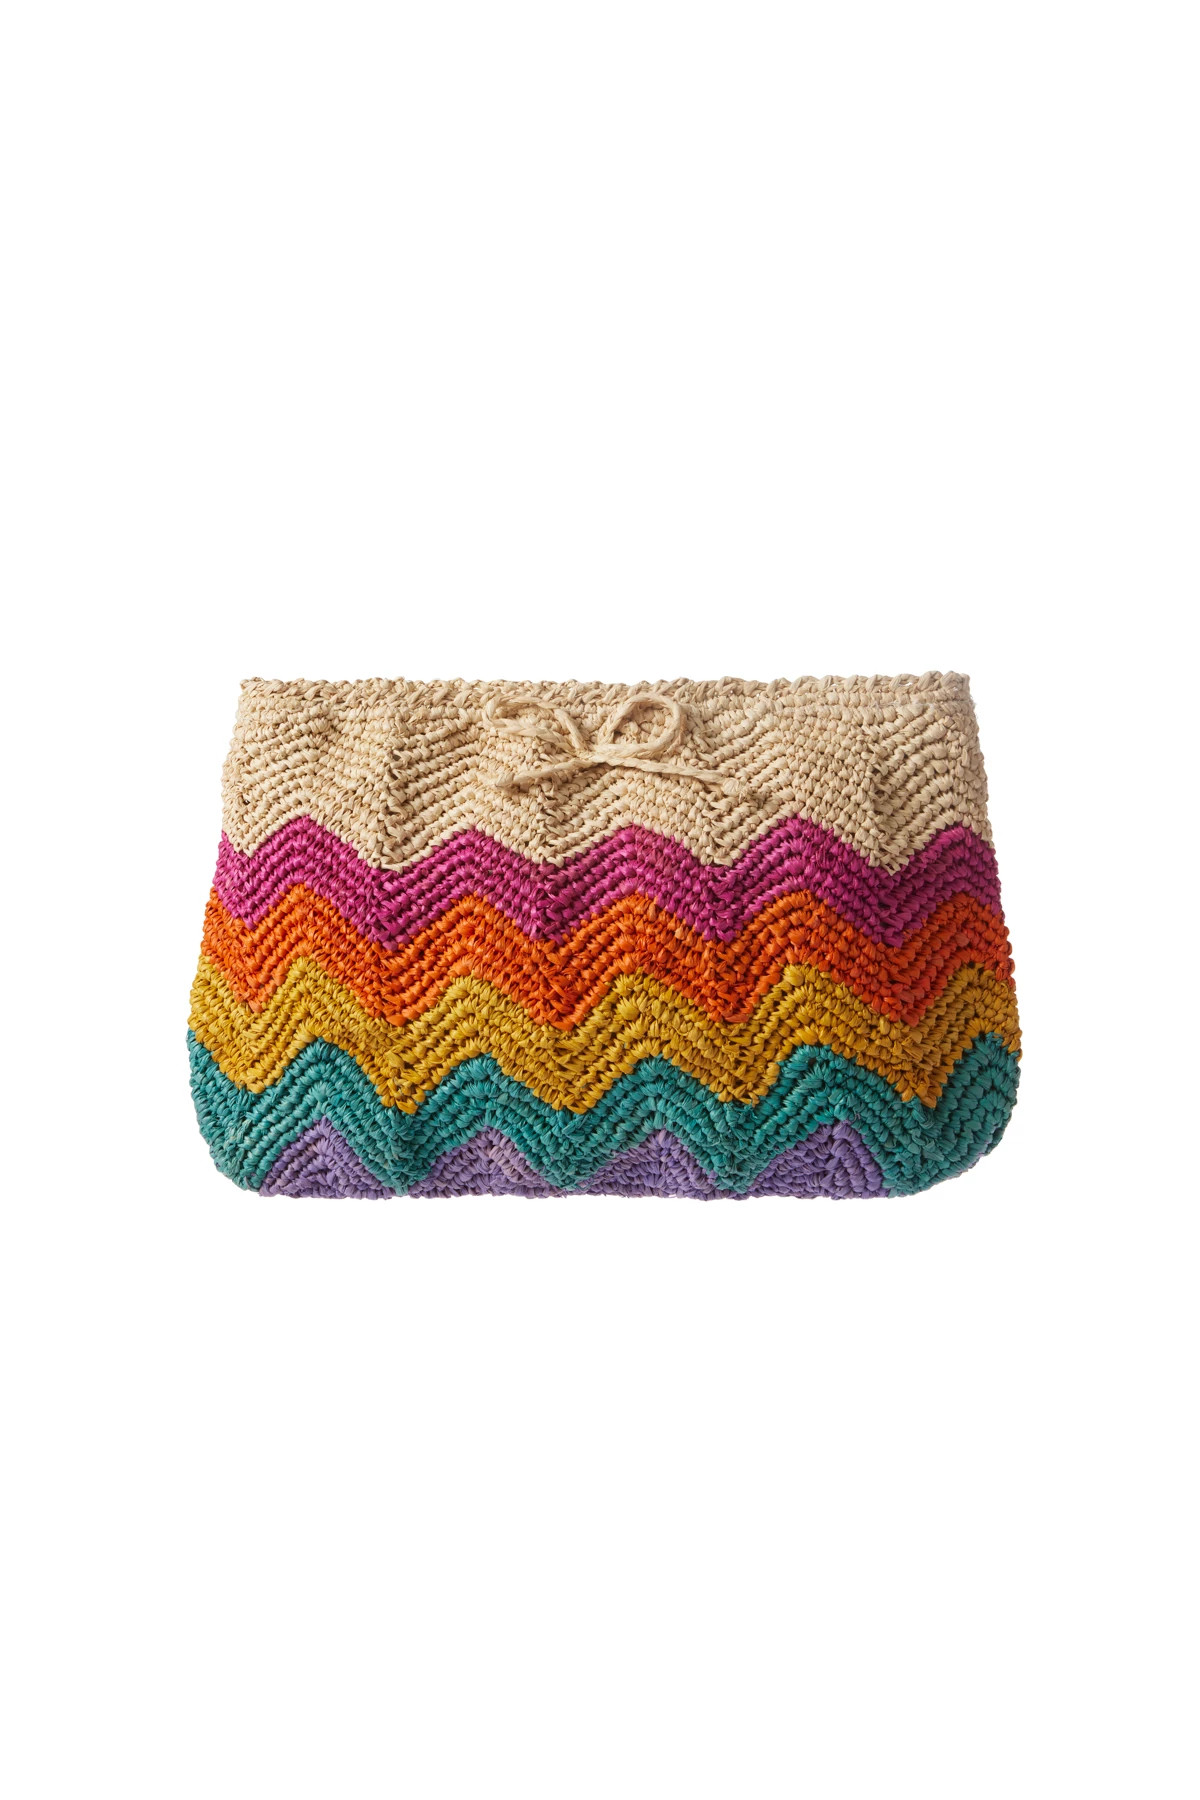 MULTI Lilly Rainbow Clutch  image number 1